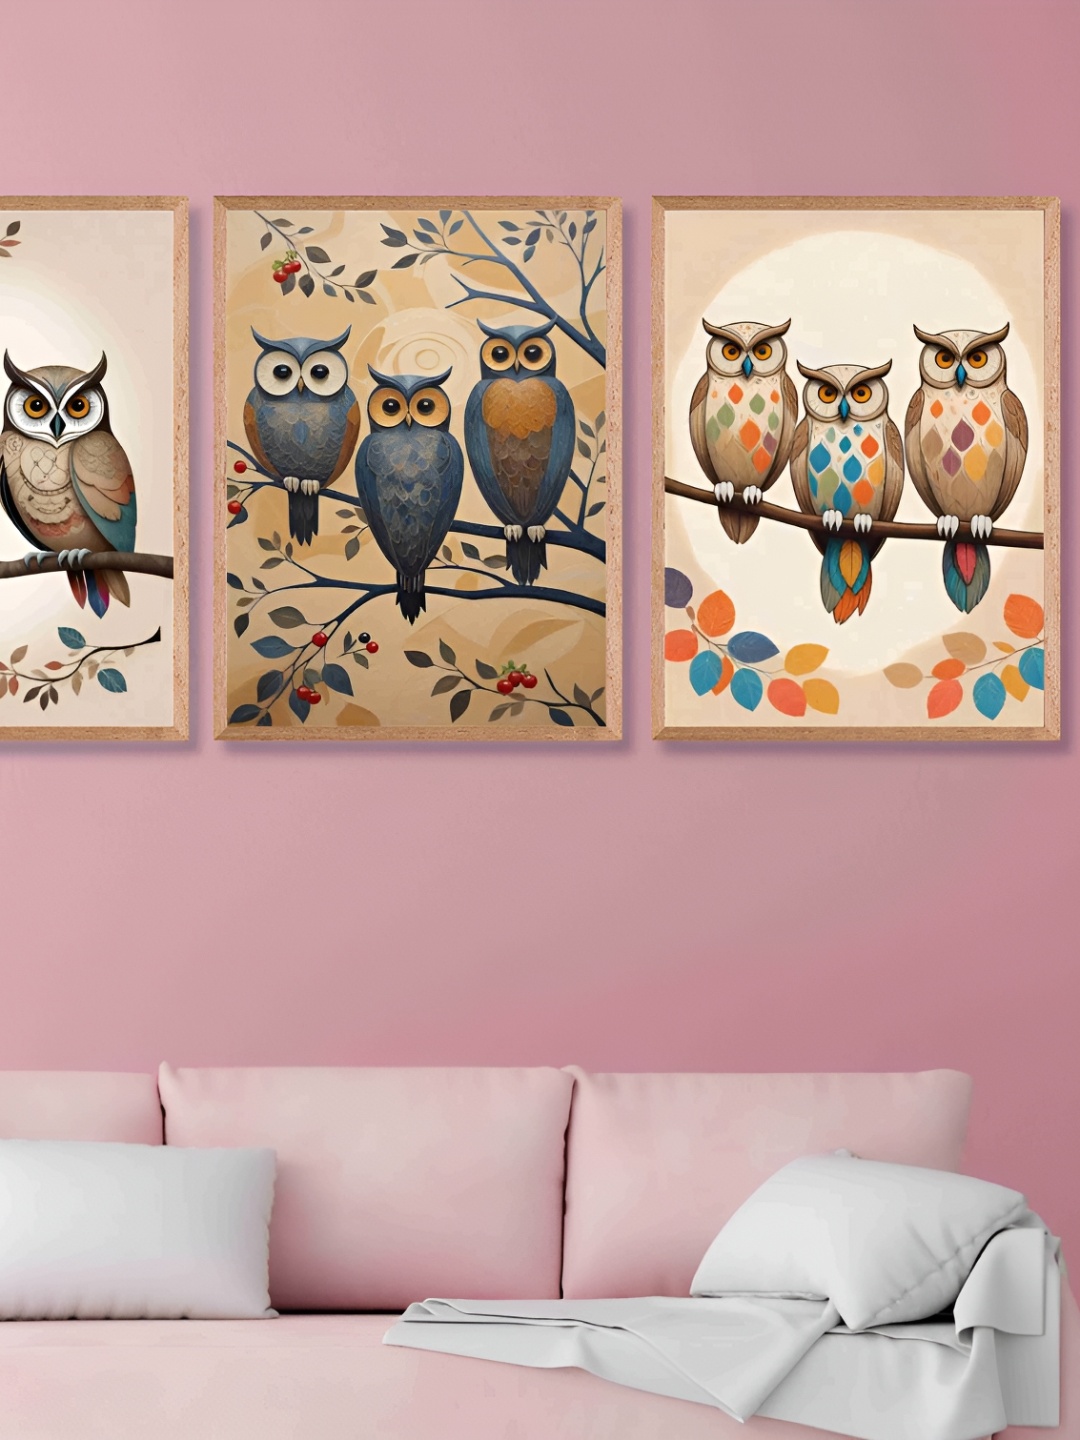 

SAF Beige & Orange 3 Piece Synthetic Wood Birds and Animals Wall Paintings